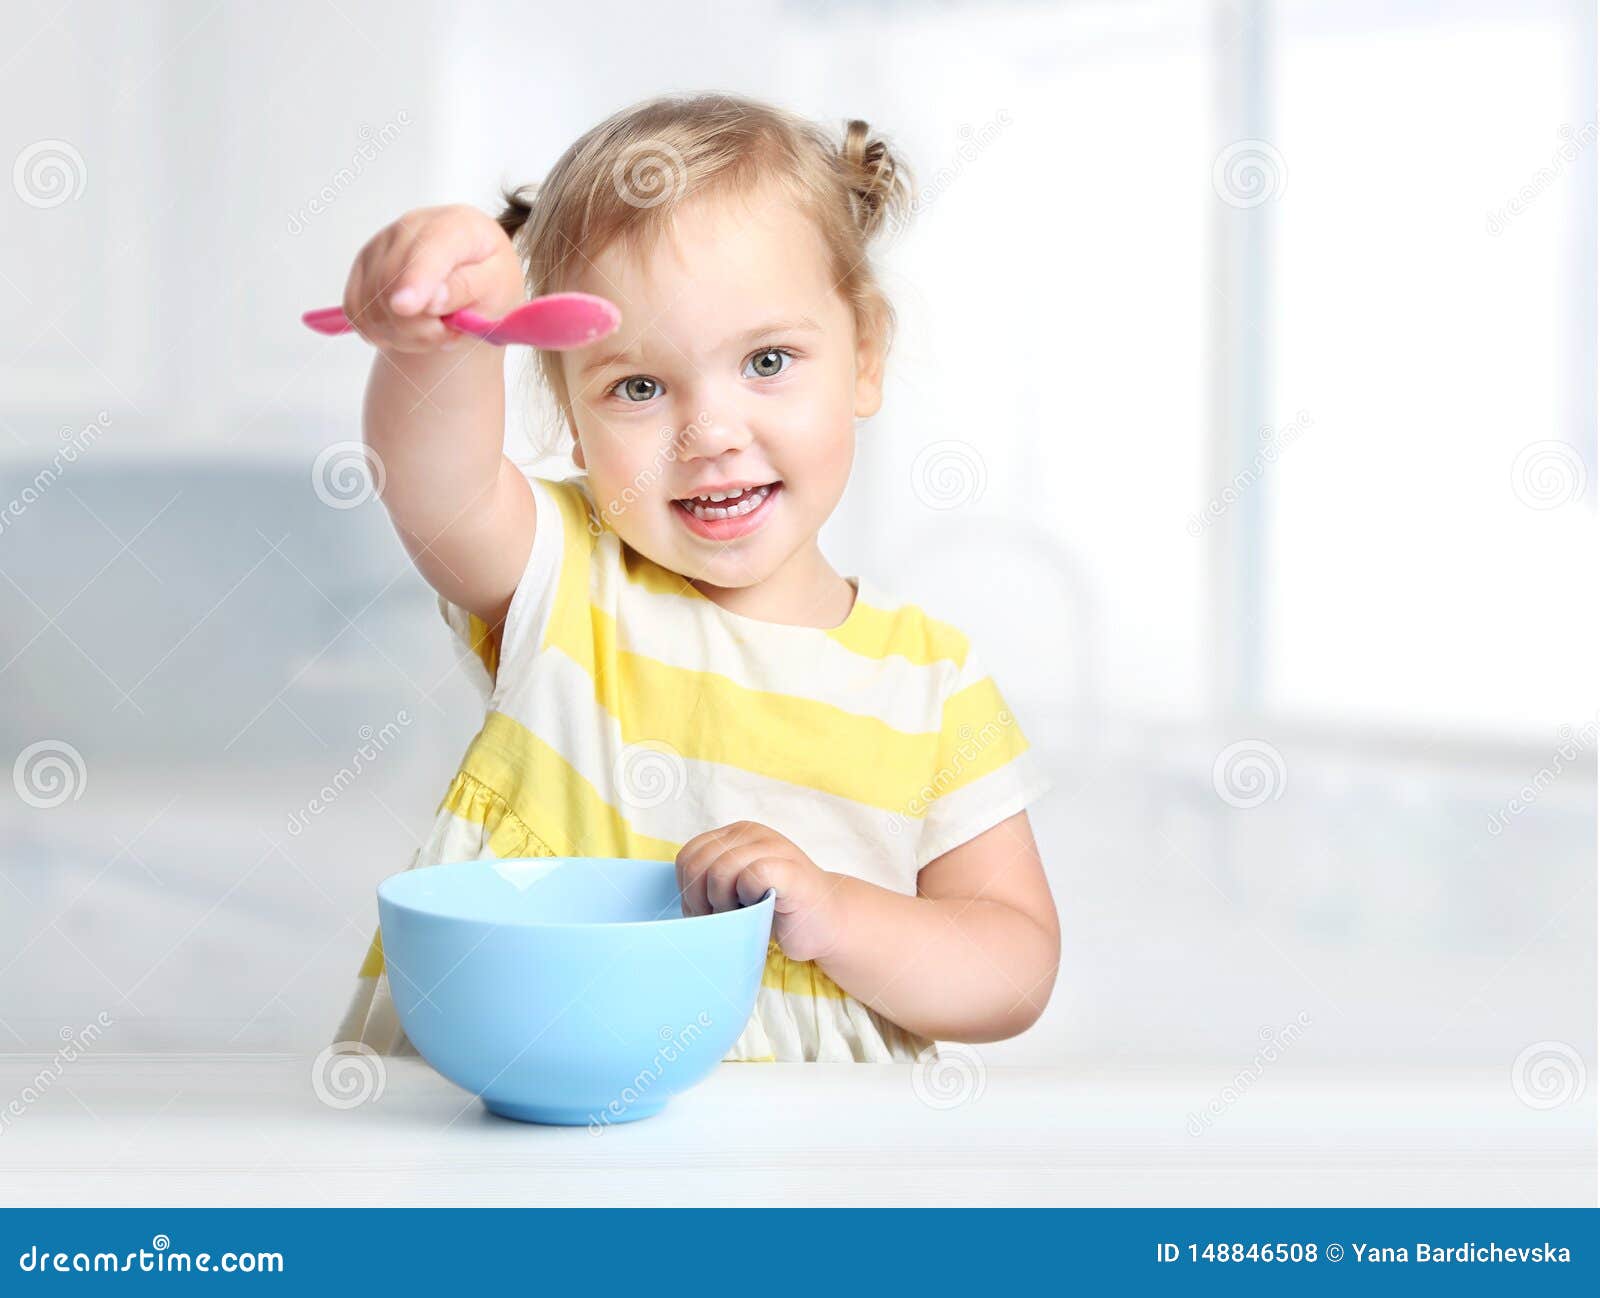 3 549 Kid Eating Bowl Spoon Photos Free Royalty Free Stock Photos From Dreamstime